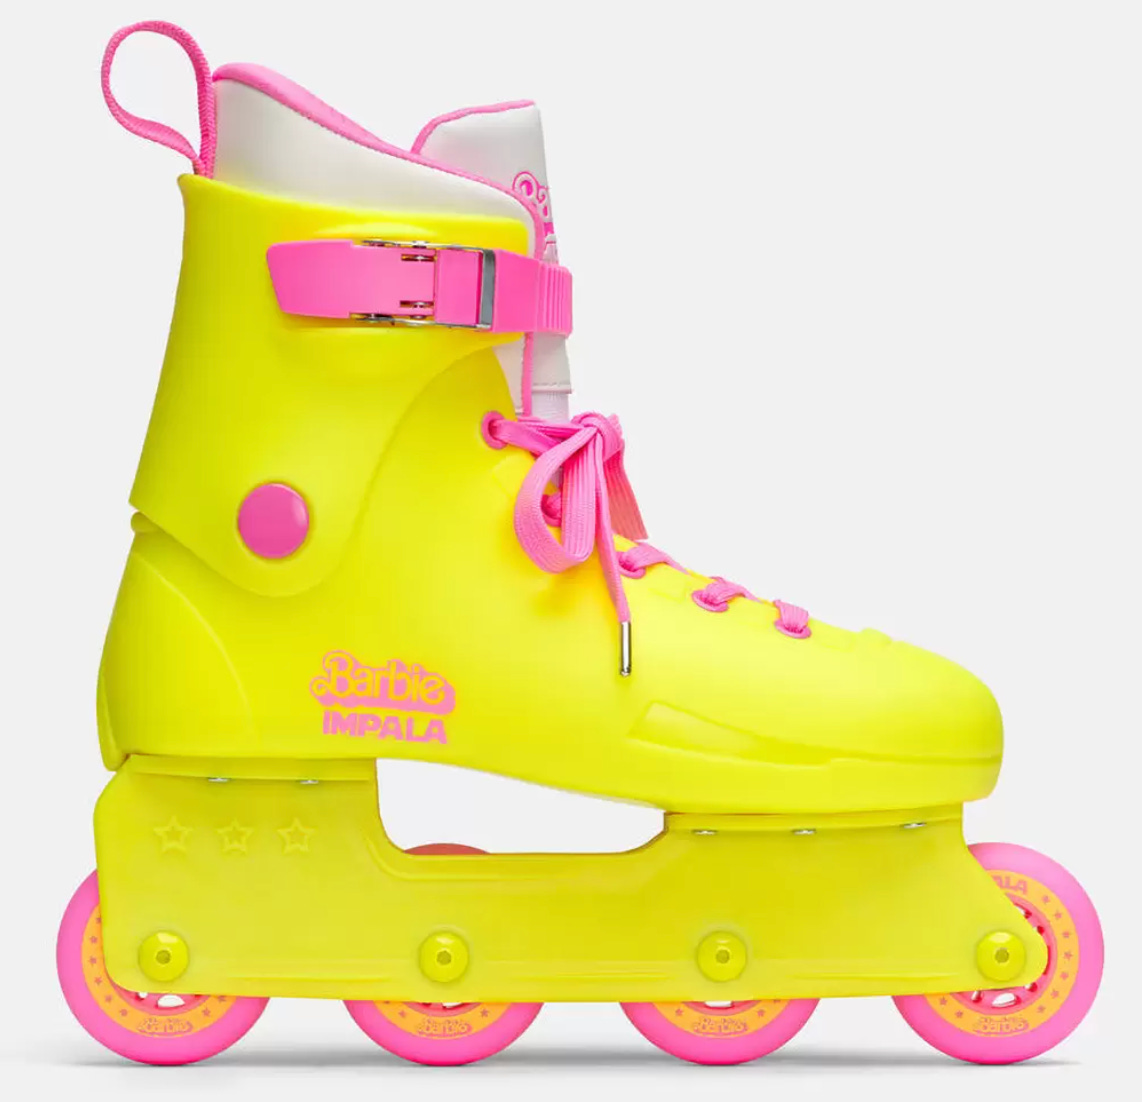 Neon yellow Barbie rollerblades from Impala, with pink laces and accents